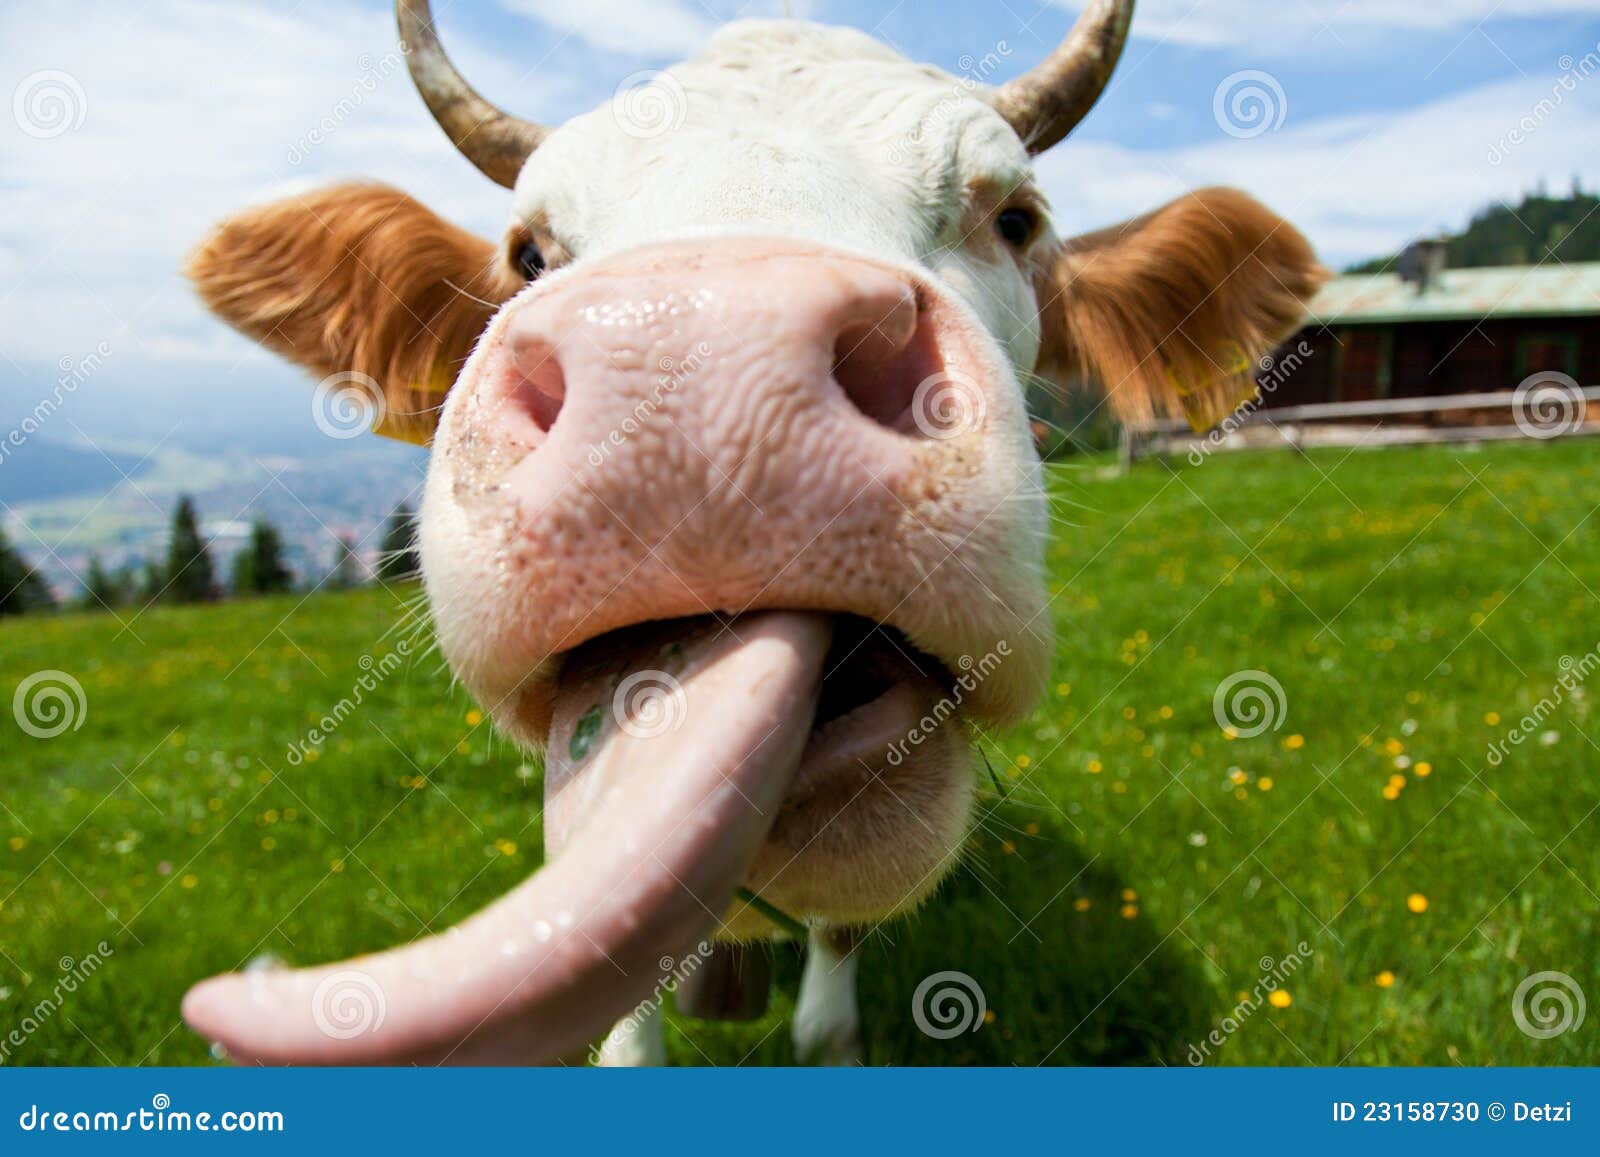 cow with tongue